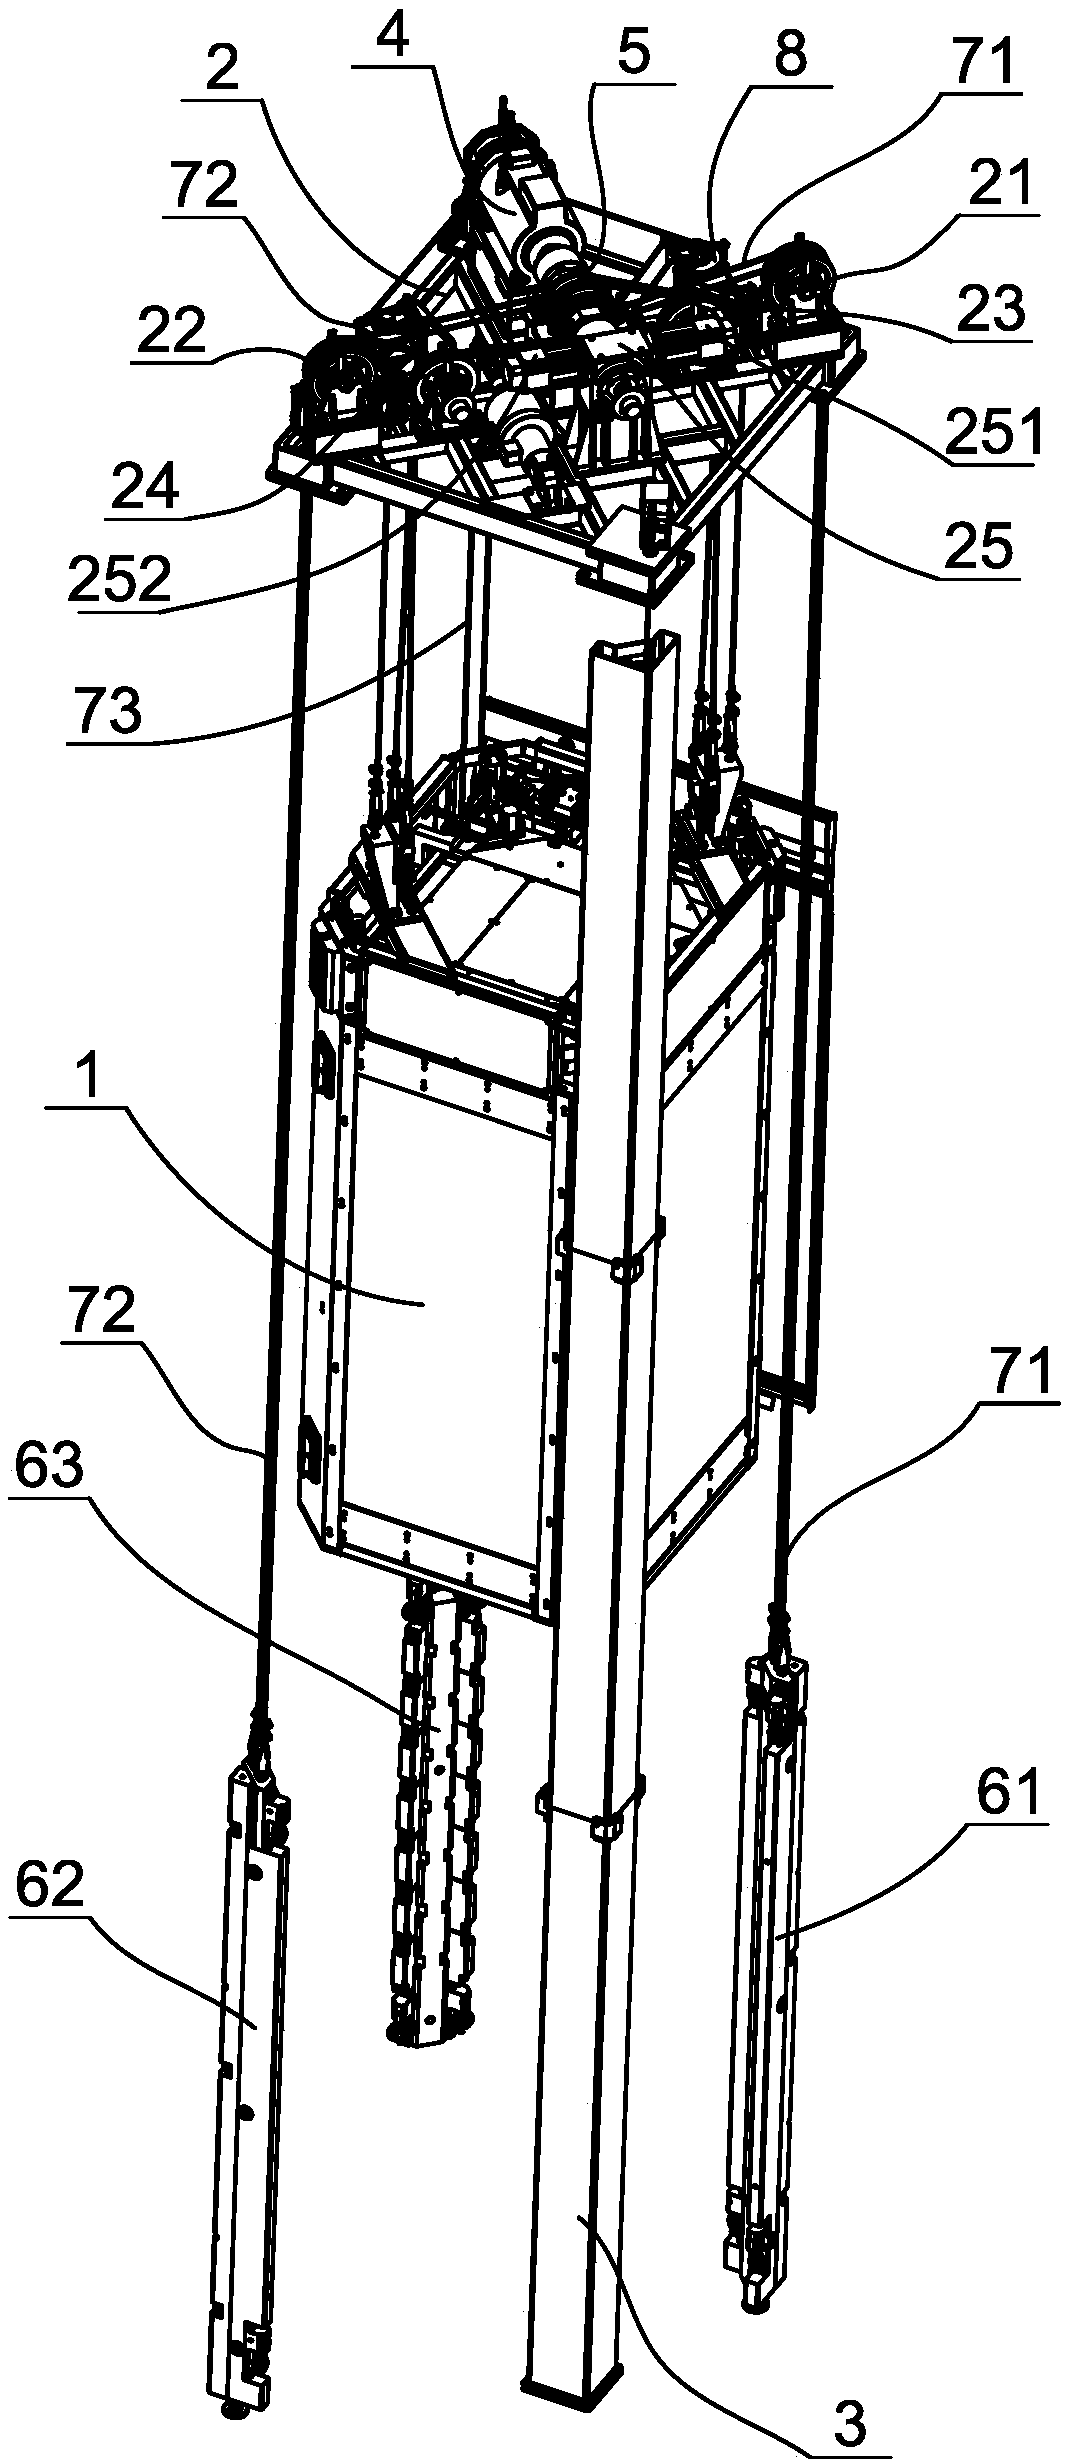 Counterweight arrangement structure in elevator traction system